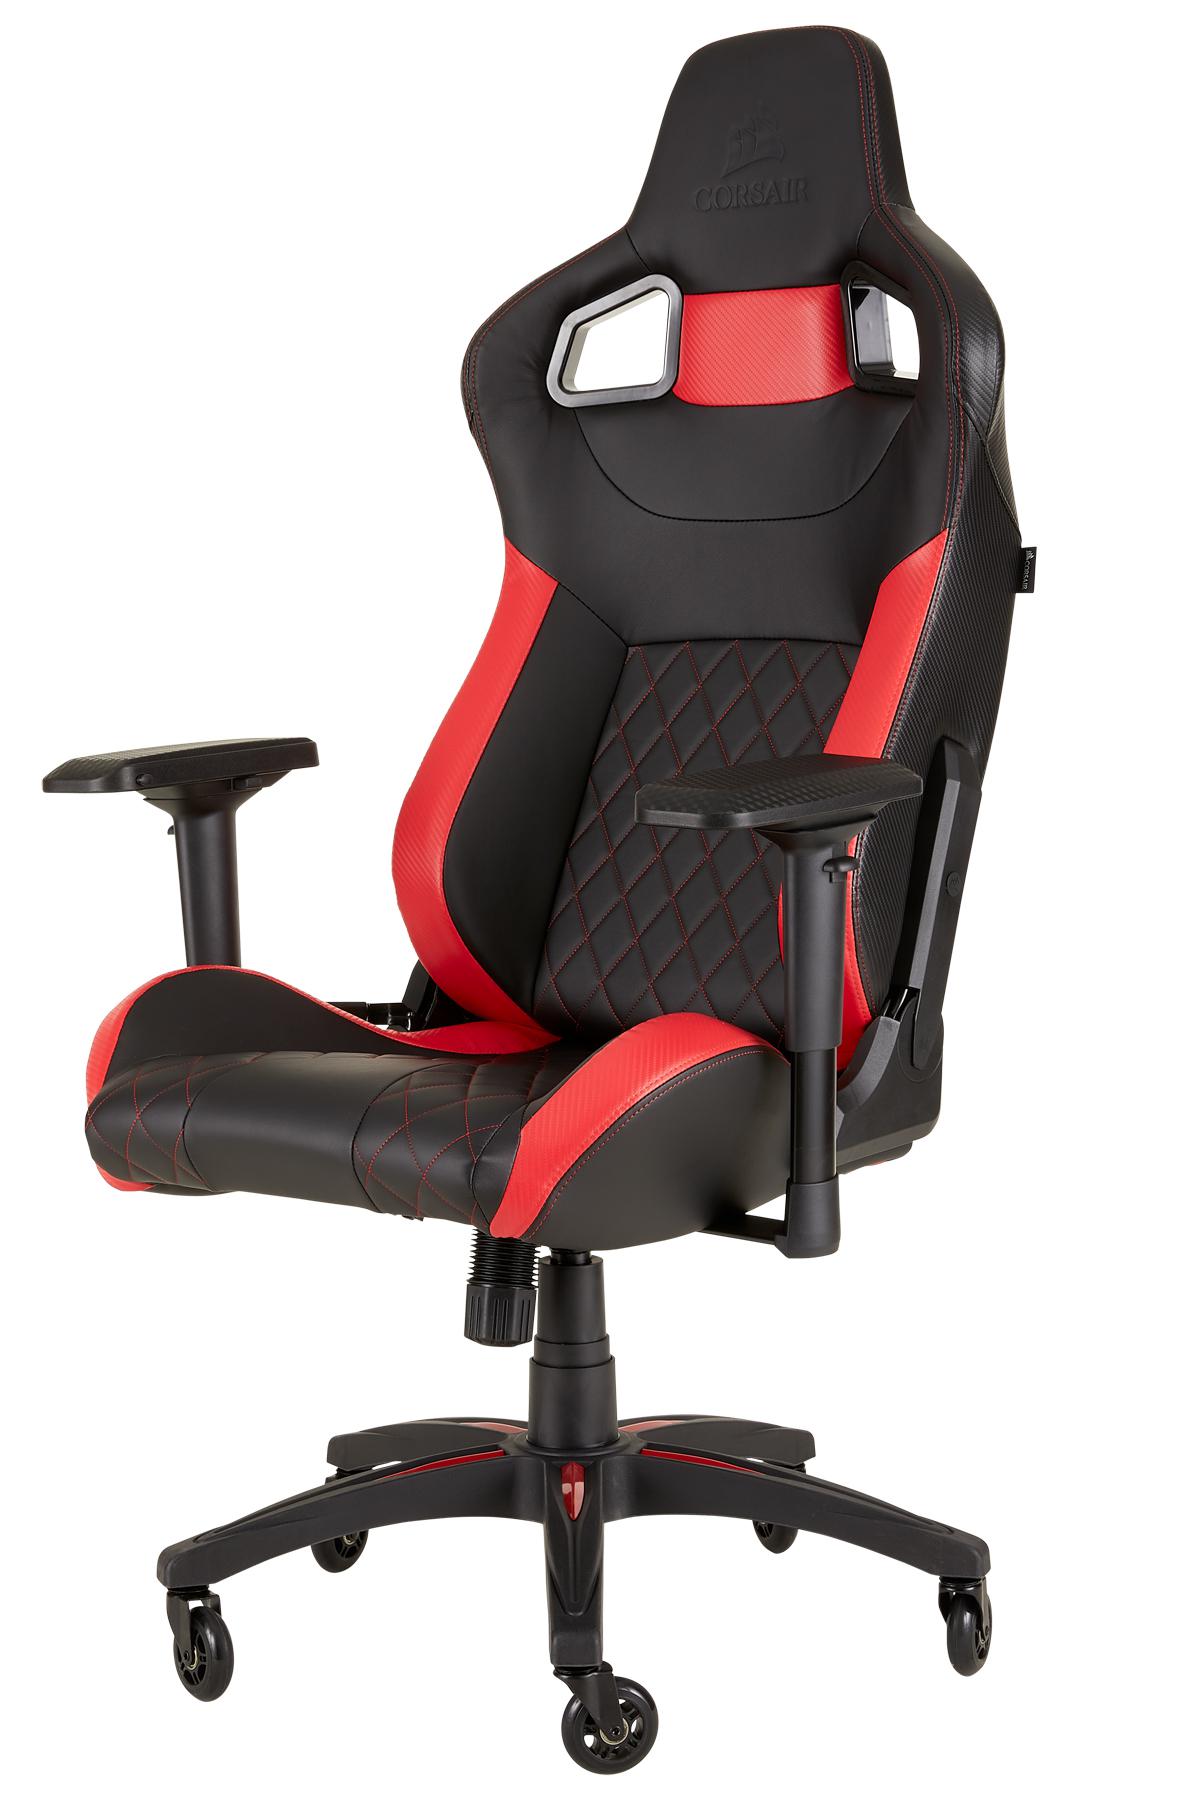 T1_chair_2018_03_red